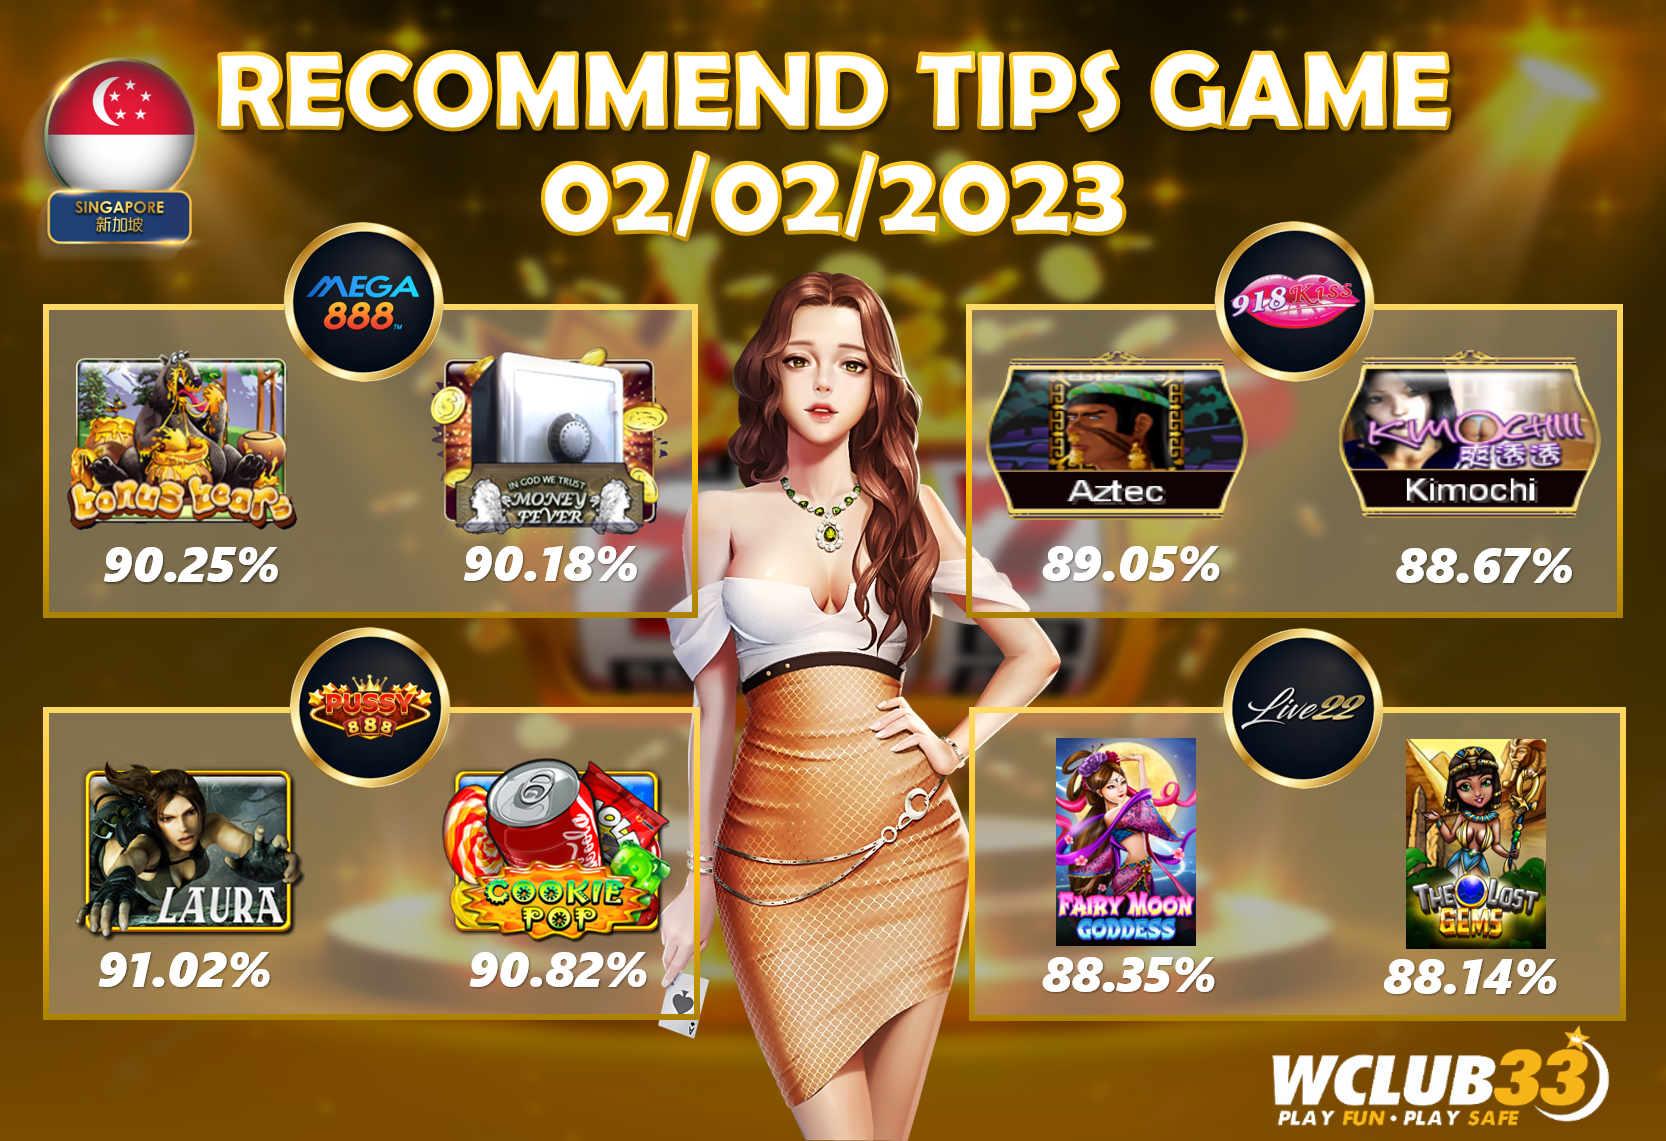 UPDATE TIPS GAME 02/02